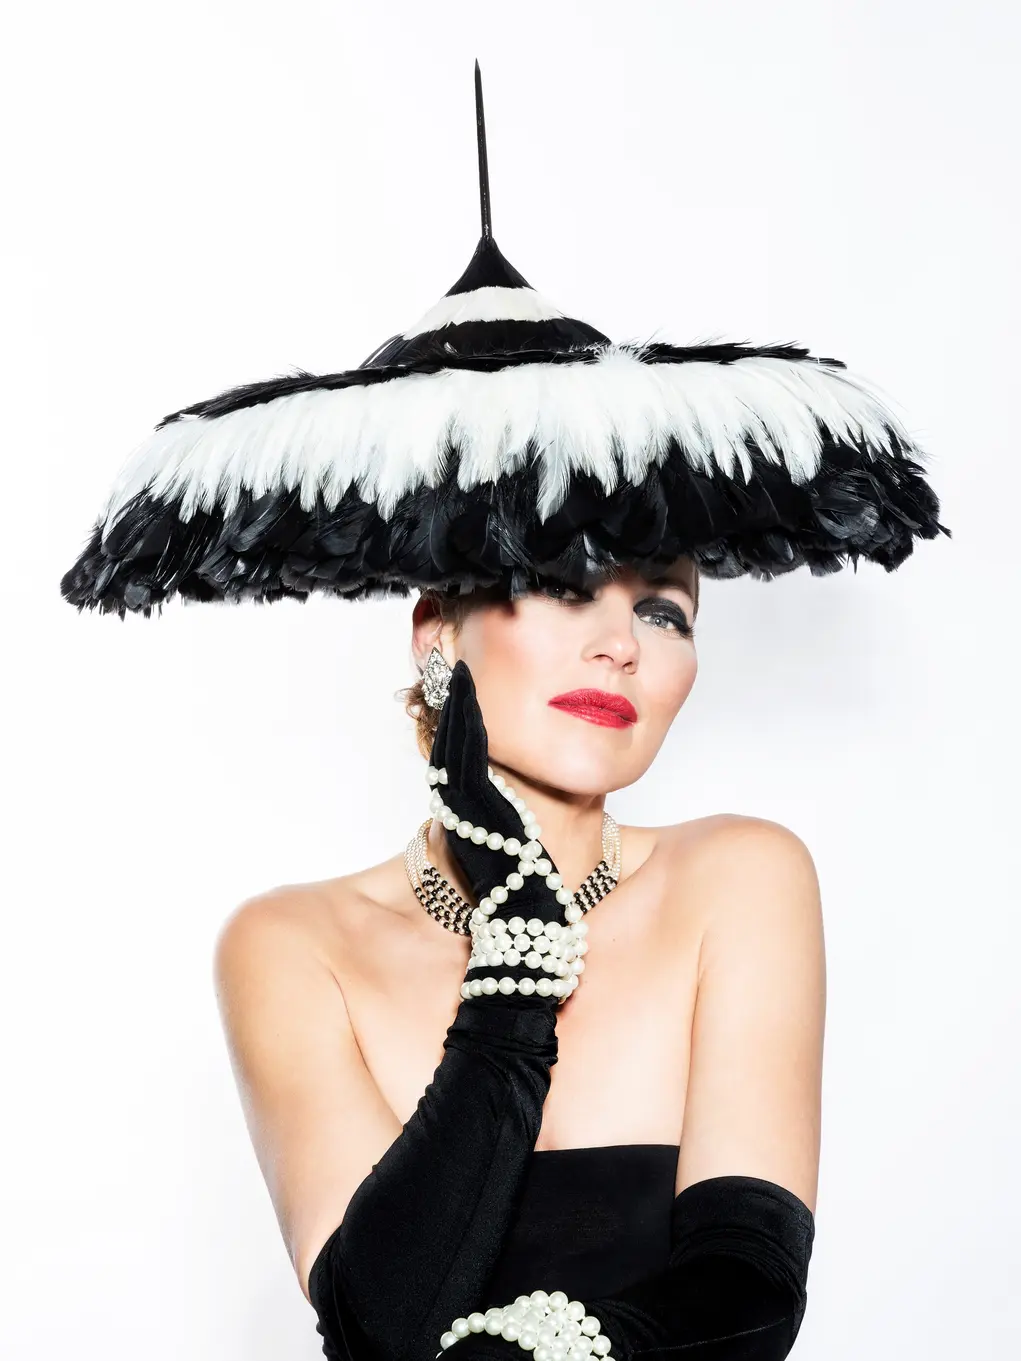 A woman wears a black and white hat that looks like an umbrella